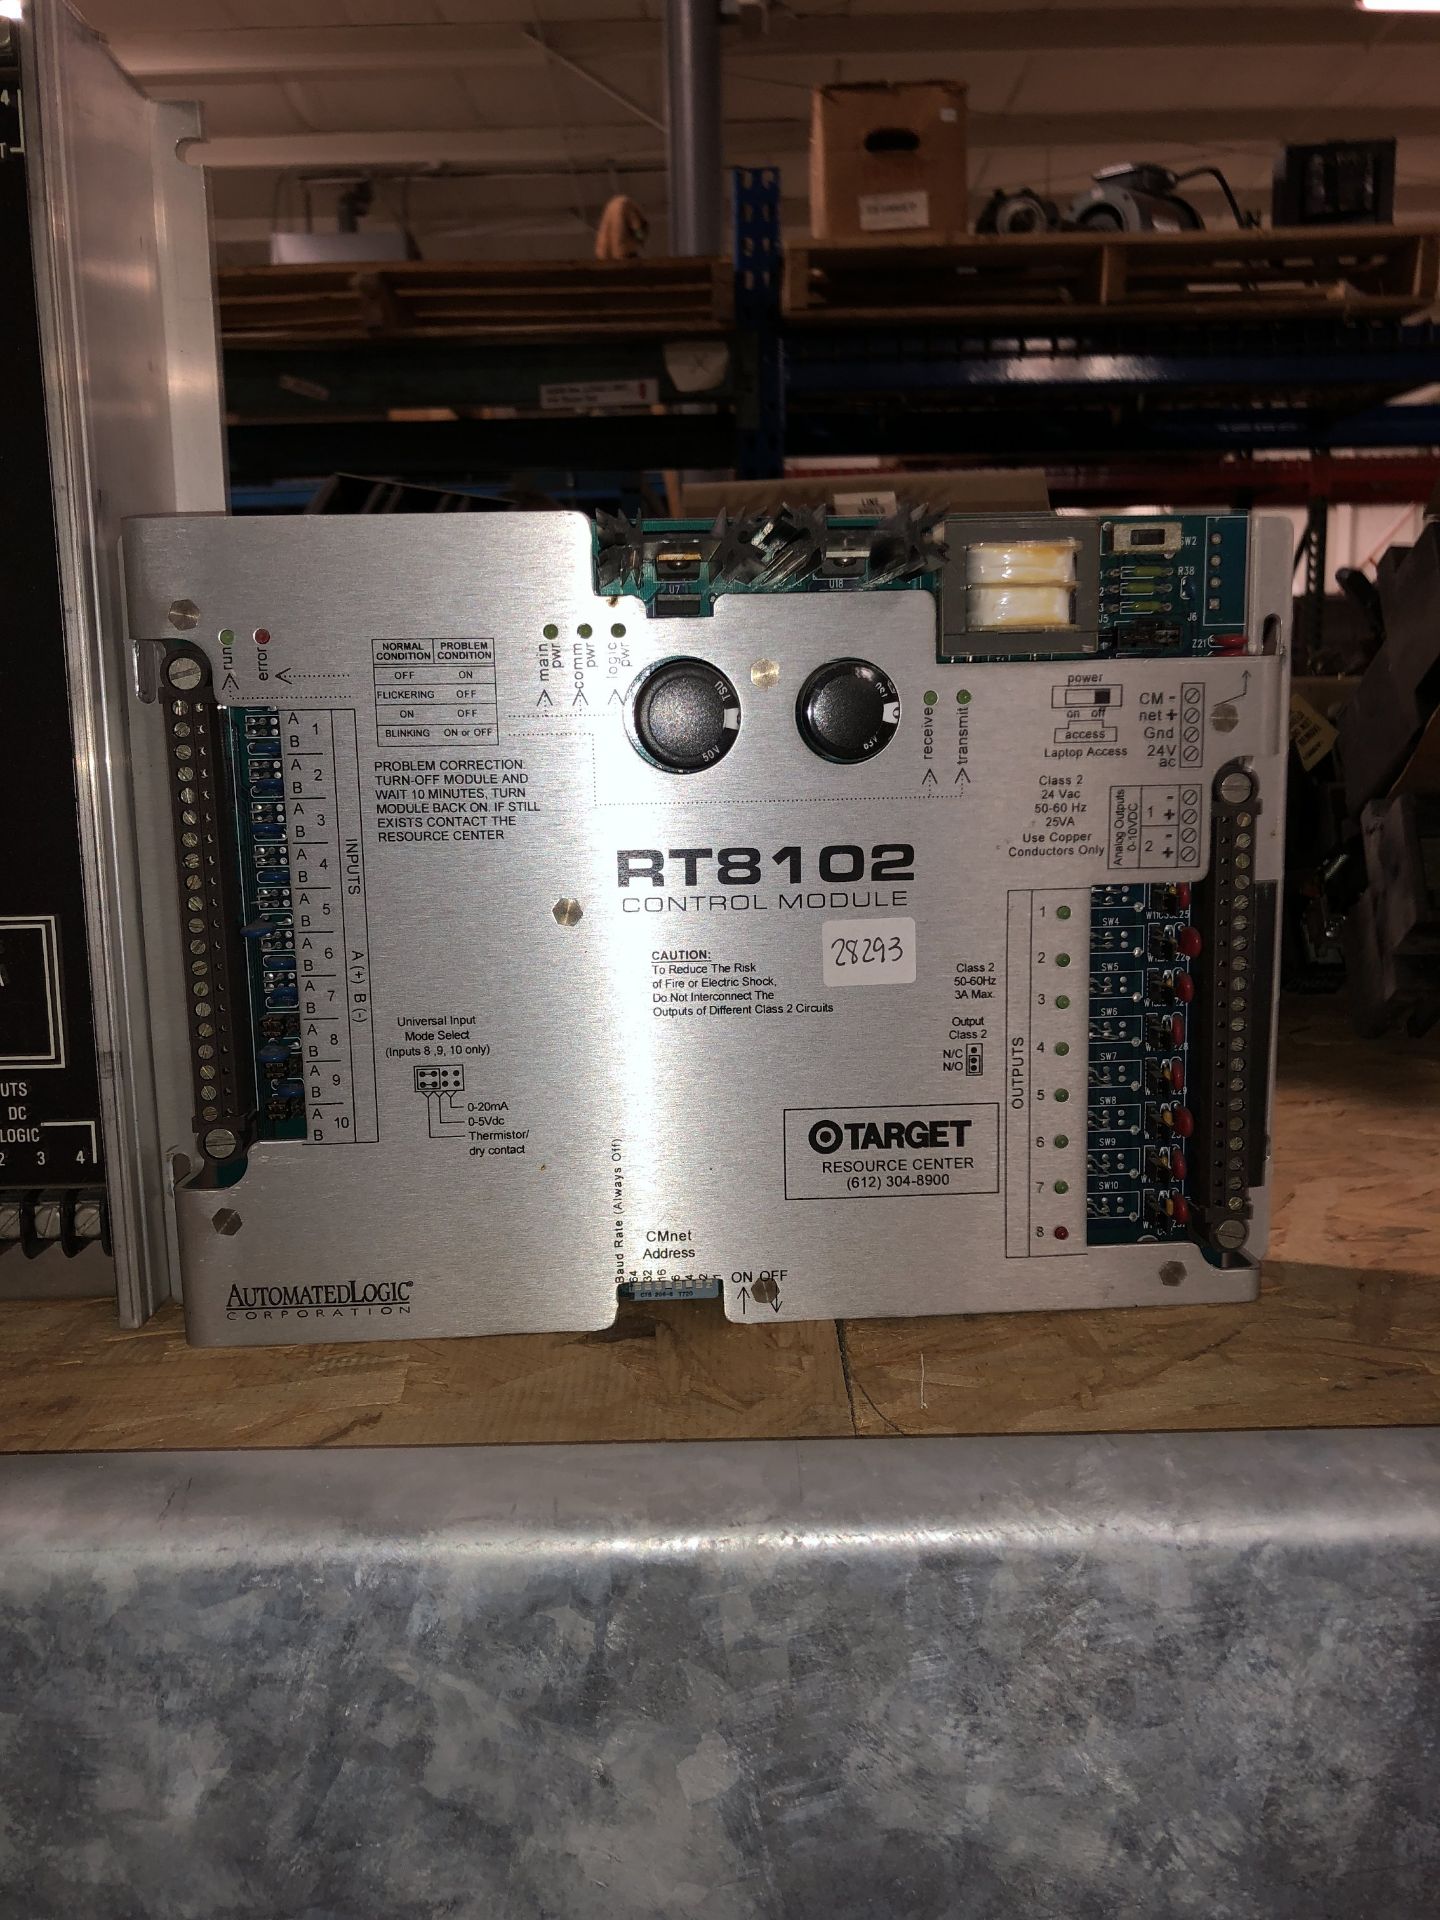 AUTOMATED LOGIC CORP CONTROL MODULE RT 8102; BARBER COLMAN EHV POWER SUPPLY SERIES 907A; BARBER